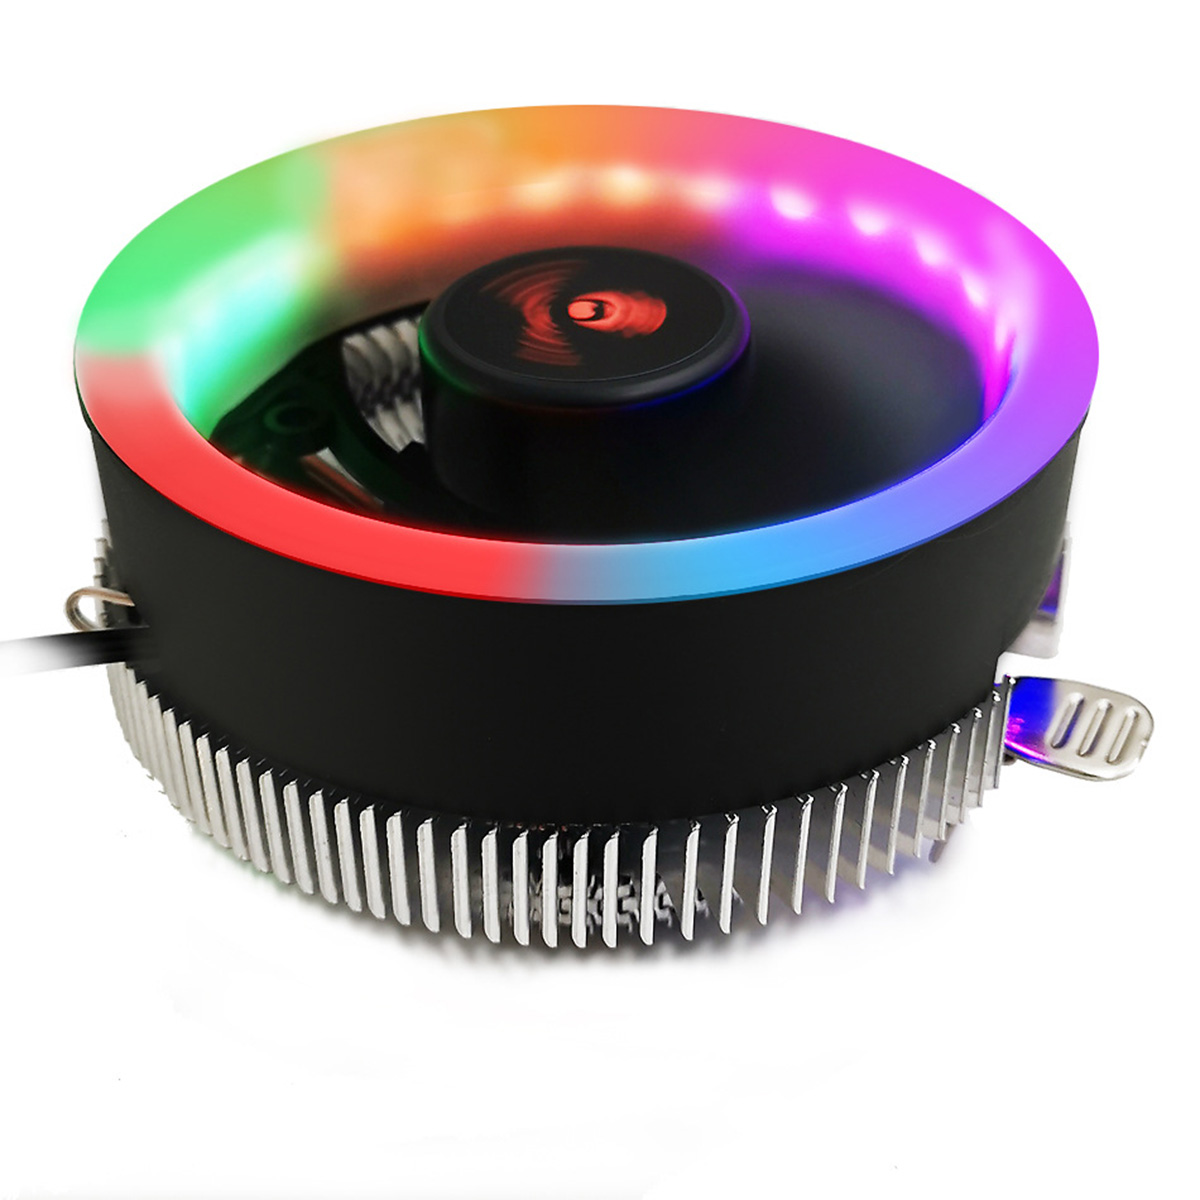 Find Coolmoon LED CPU Cooling Fan For Intel 775/1156 for AMD AM2 AM2 AM3 AM3 for Sale on Gipsybee.com with cryptocurrencies